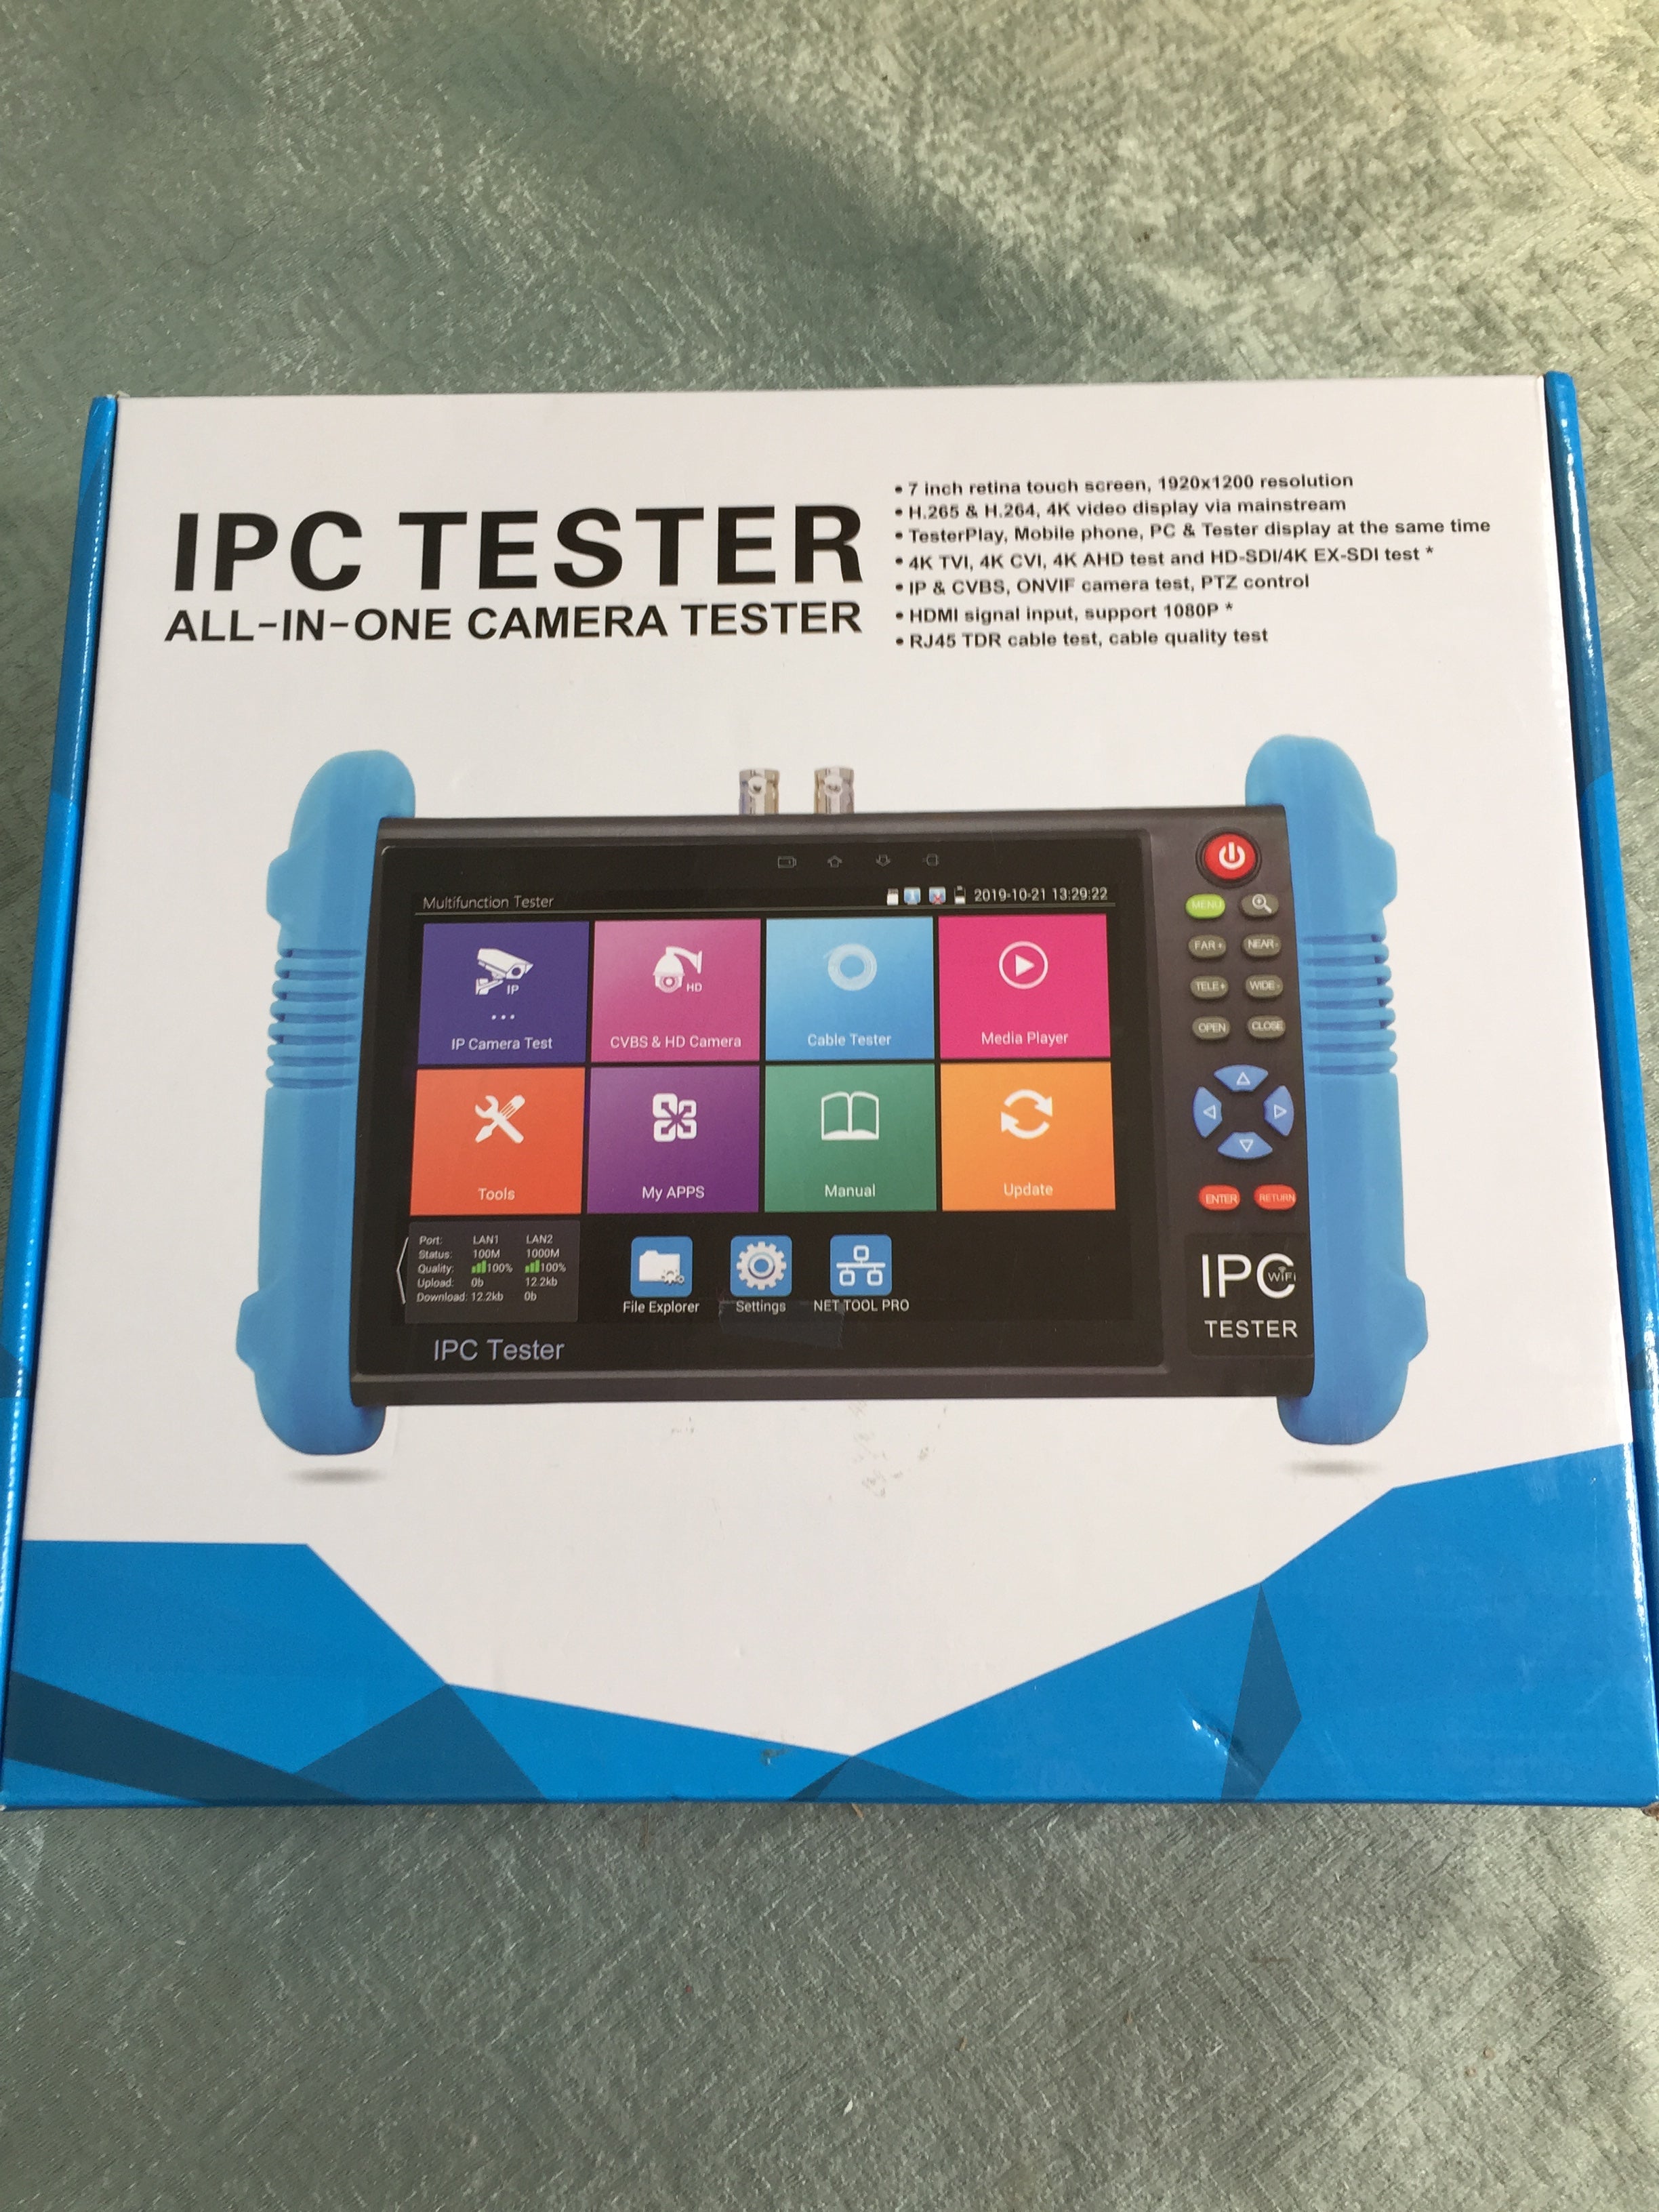 IPC Tester All-In-One Camera Tester 7 Inch Retina Touch Screen CCTV Tester (7609029853422)